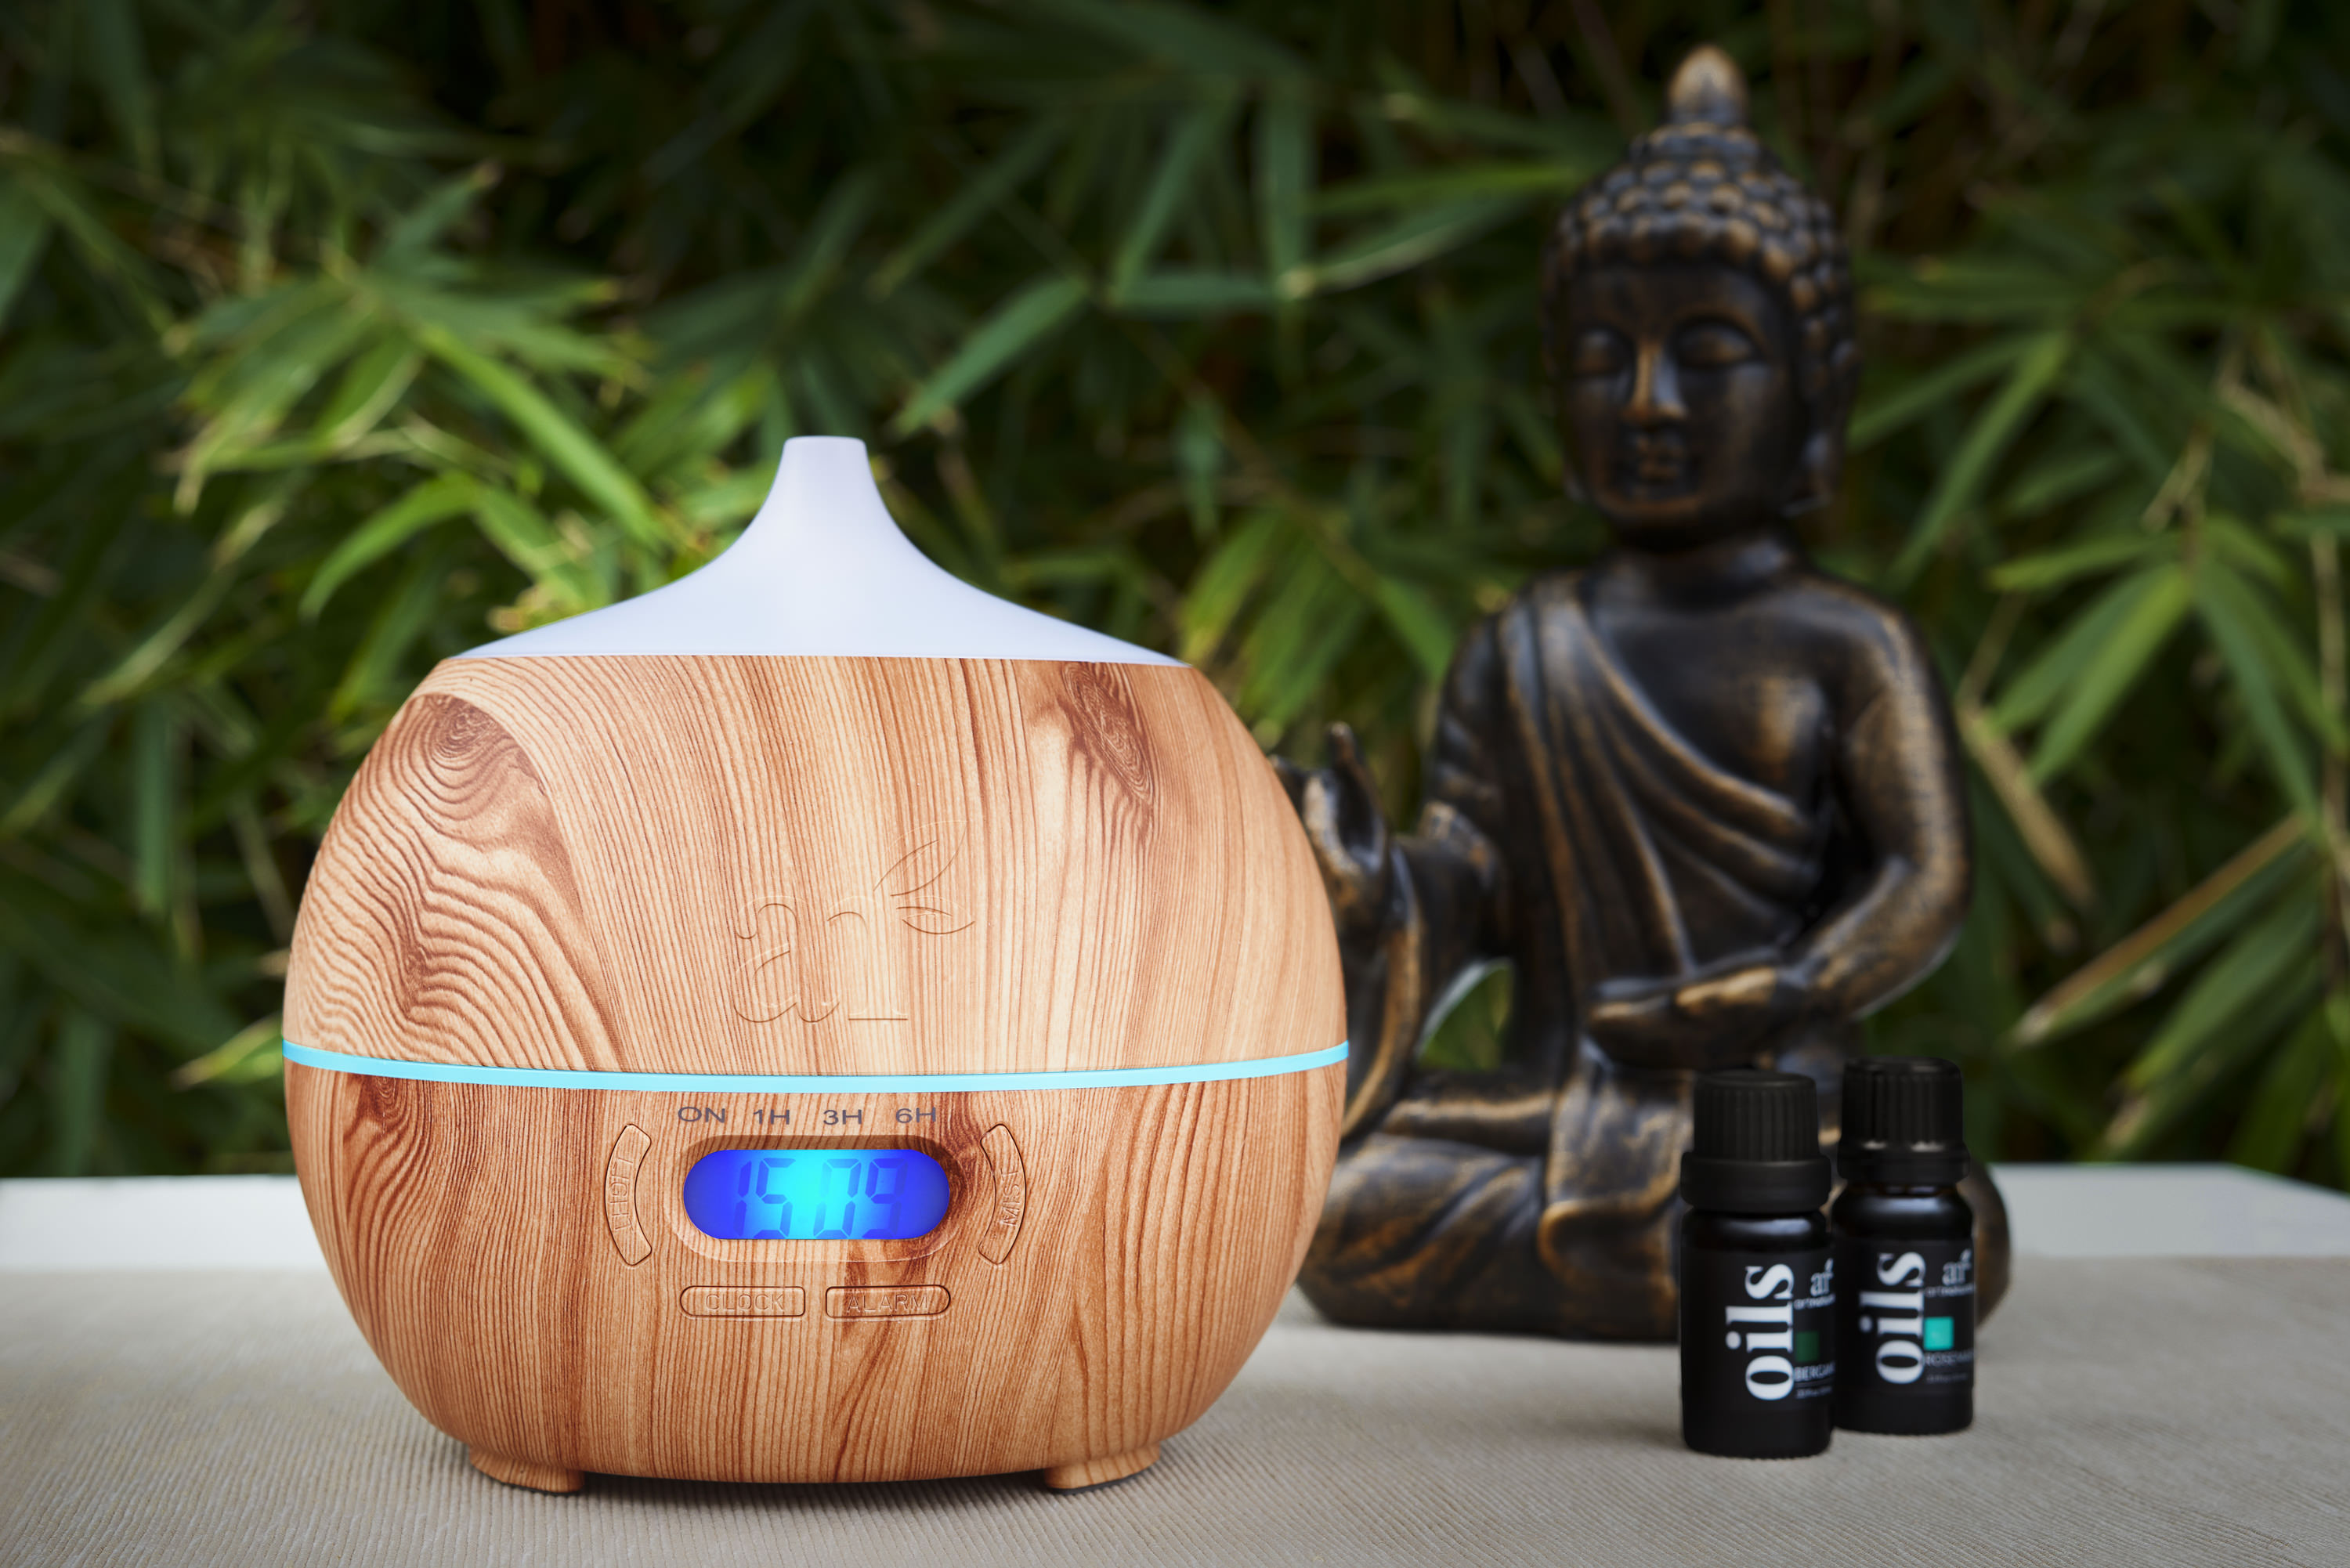 Ultrasonic Bluetooth Essential Oil Diffuser (400mL) 7 Color LED, Clock Purifier - image 2 of 6